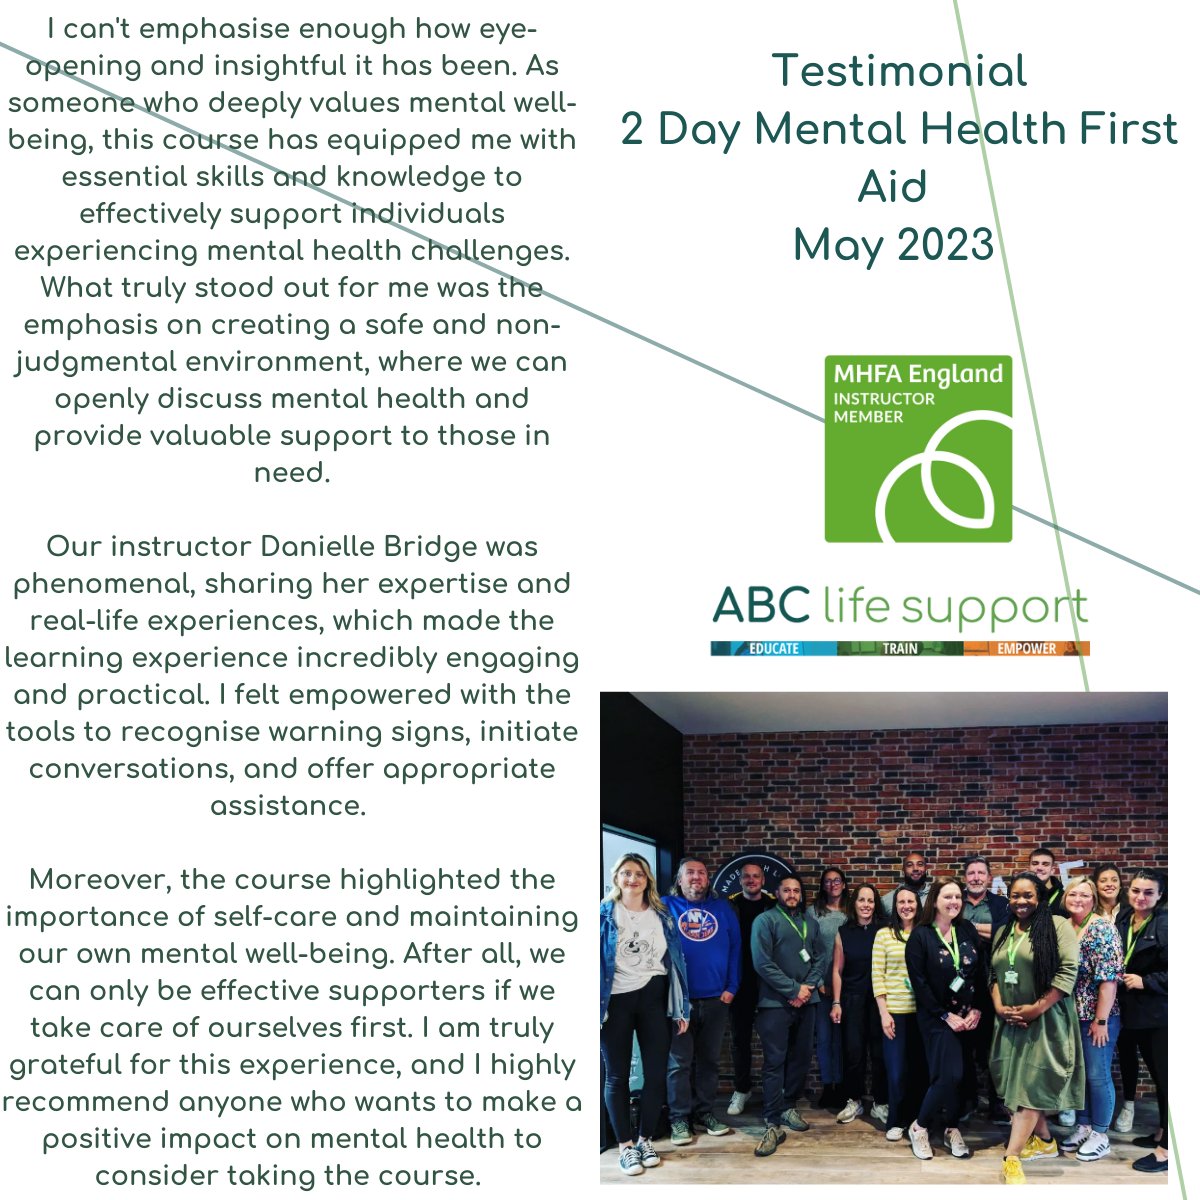 Knowing that our training makes this sort of impact with our learners is why we do what we do. 

#mhfaengland
#mentalhealthfirstaid
#impact